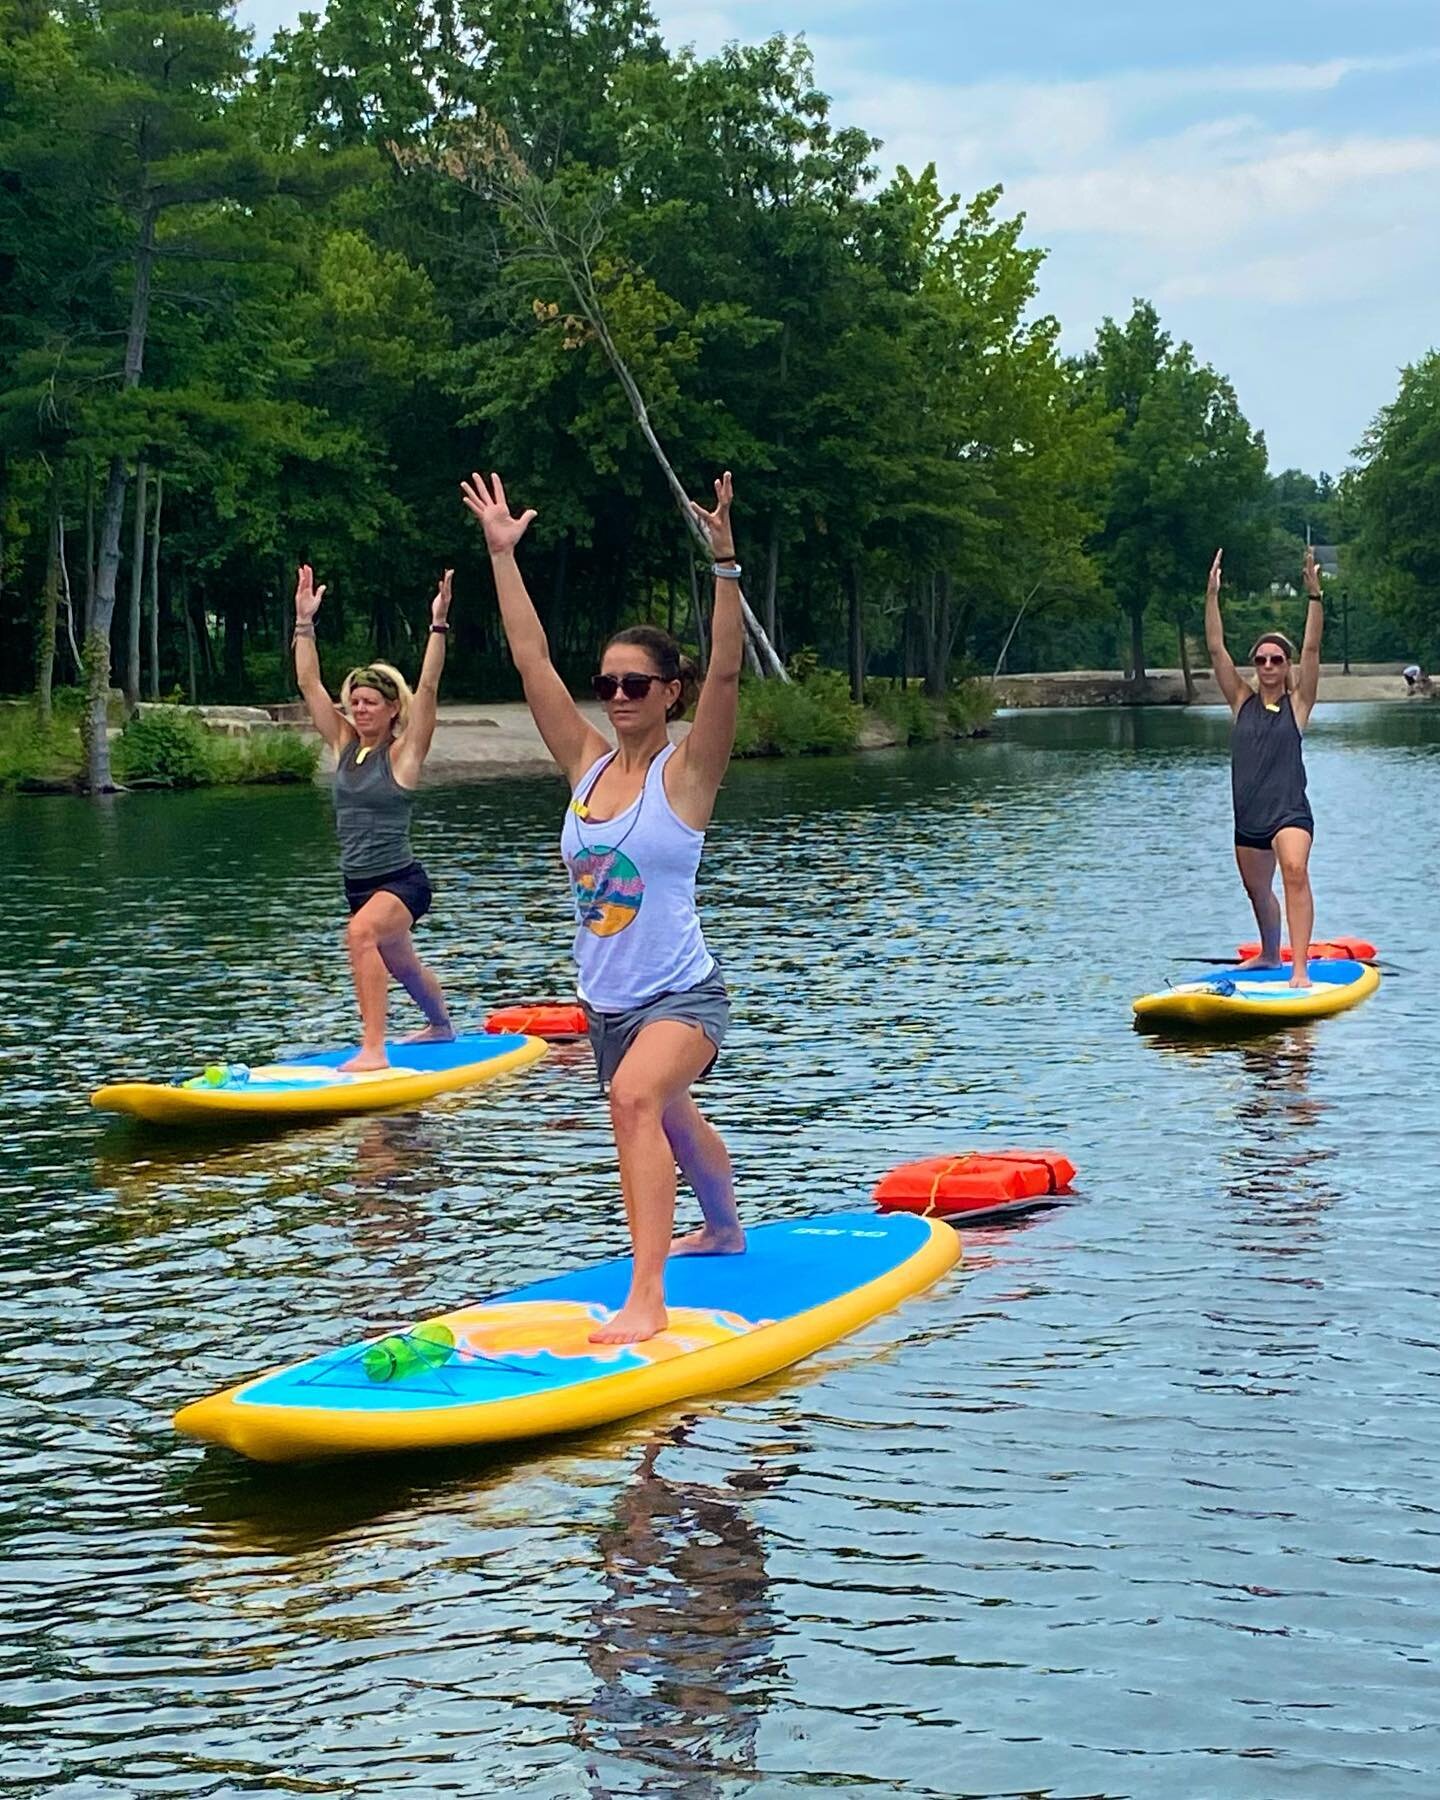 SUP yoga sessions are filling up fast this summer. Don&rsquo;t miss out!! Book your spot and enjoy a 90 minute floating yoga adventure in one of our beautiful, clean waterways. We include everything you need plus a paddle lesson. #supyogaadventures  